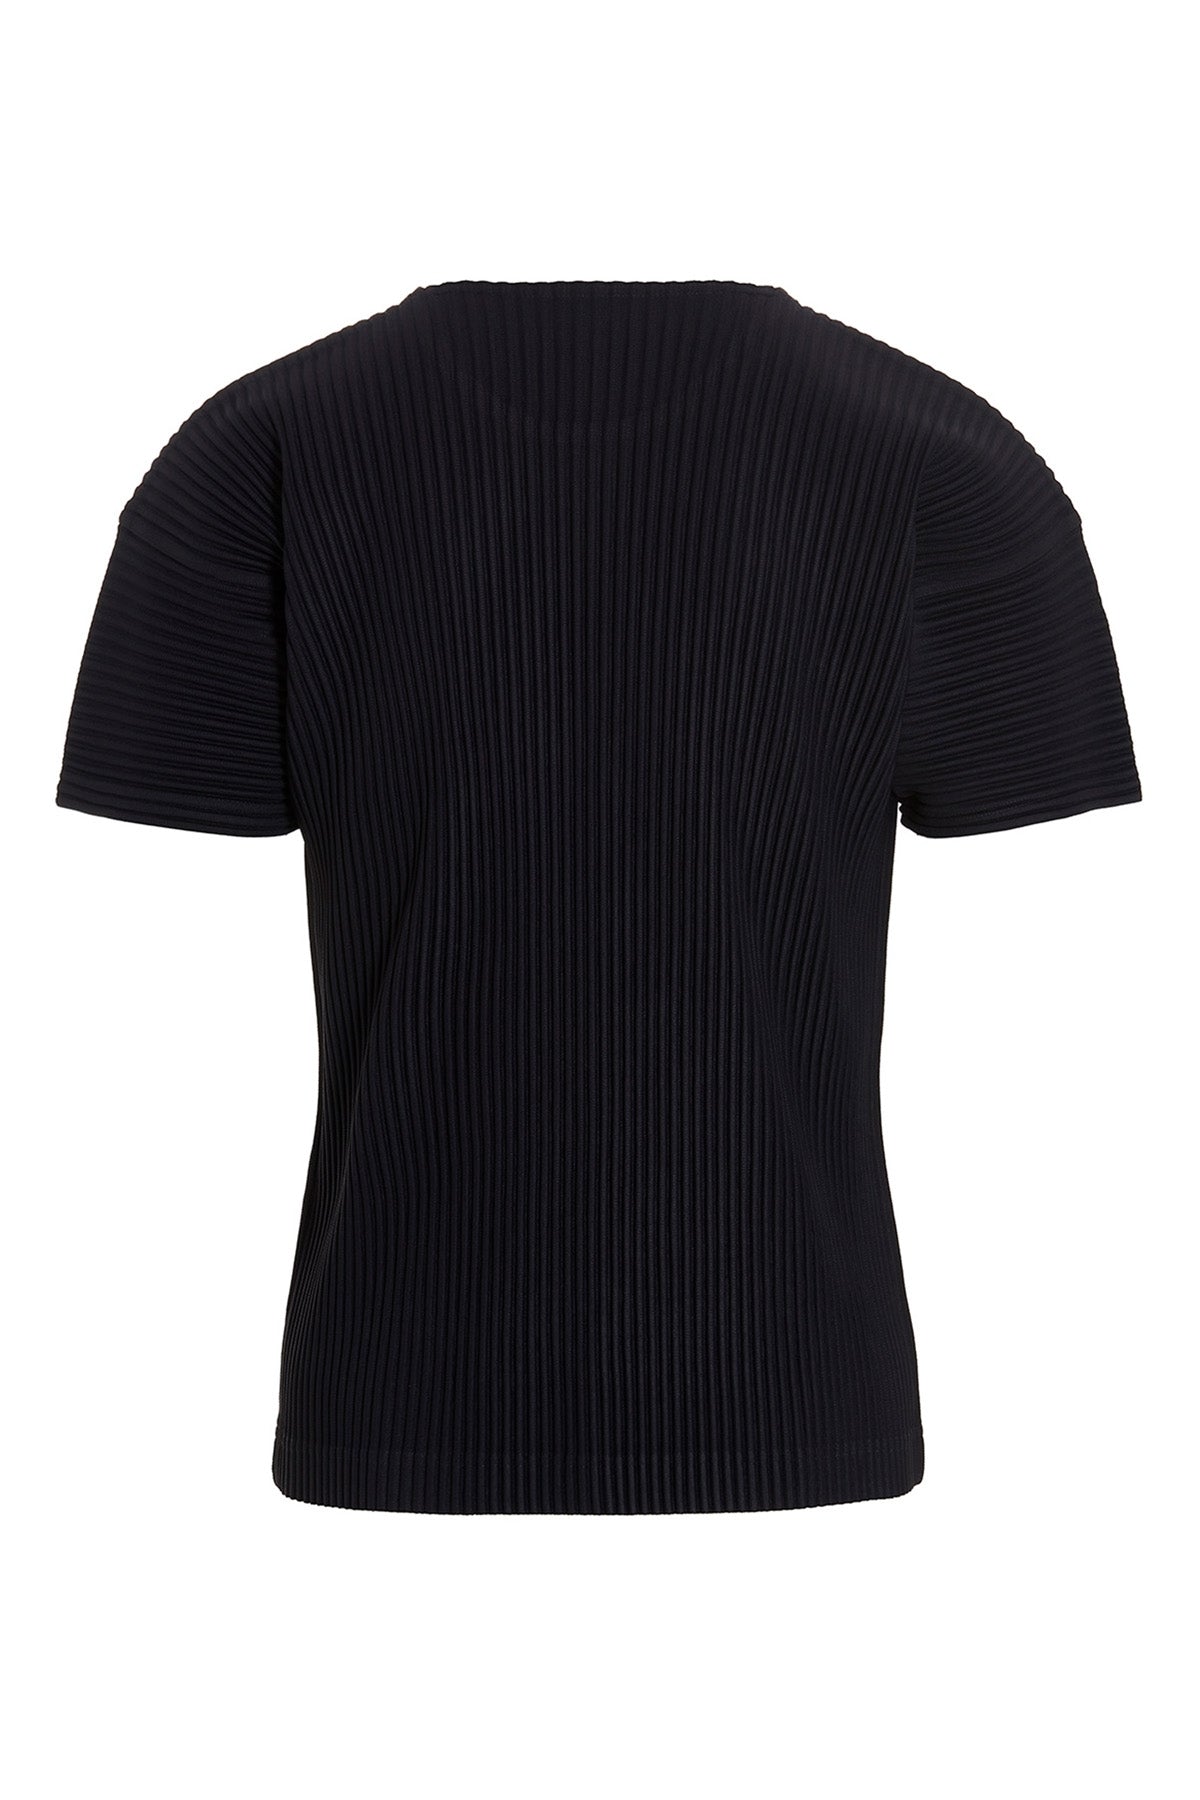 HOMME PLISSE' ISSEY MIYAKE PLEATED T-SHIRT